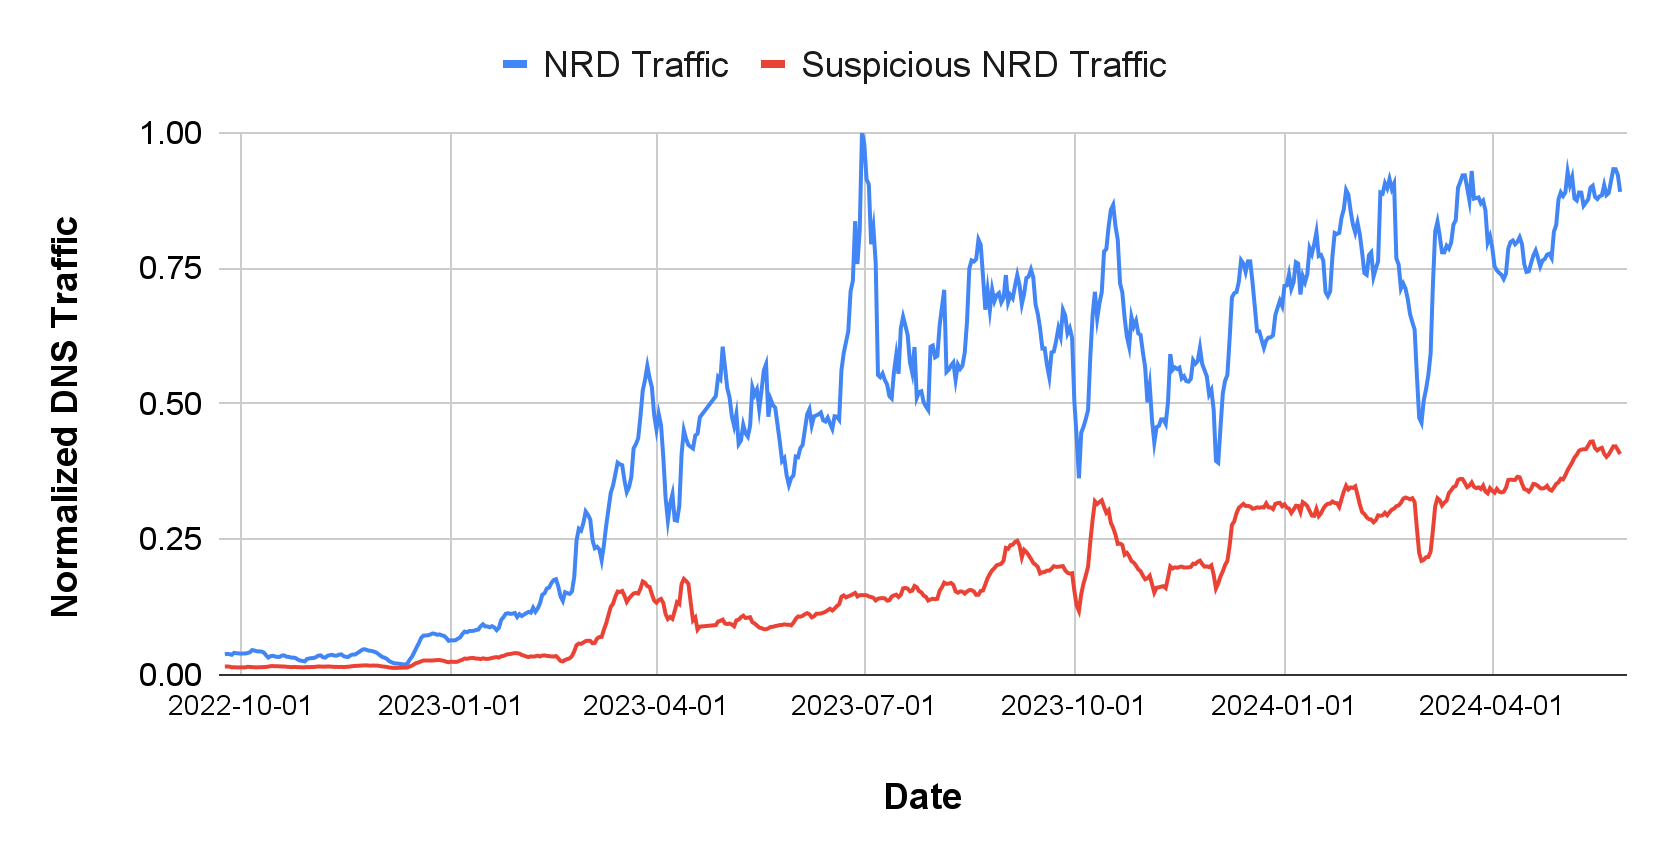 Line graph showing Normalized DNS Traffic over time, with two lines labeled "NRD Traffic" in blue and "Suspicious NRD Traffic" in red, displaying the traffic from October 2022 to April 2023. The blue line shows overall higher values than the red line throughout the period.